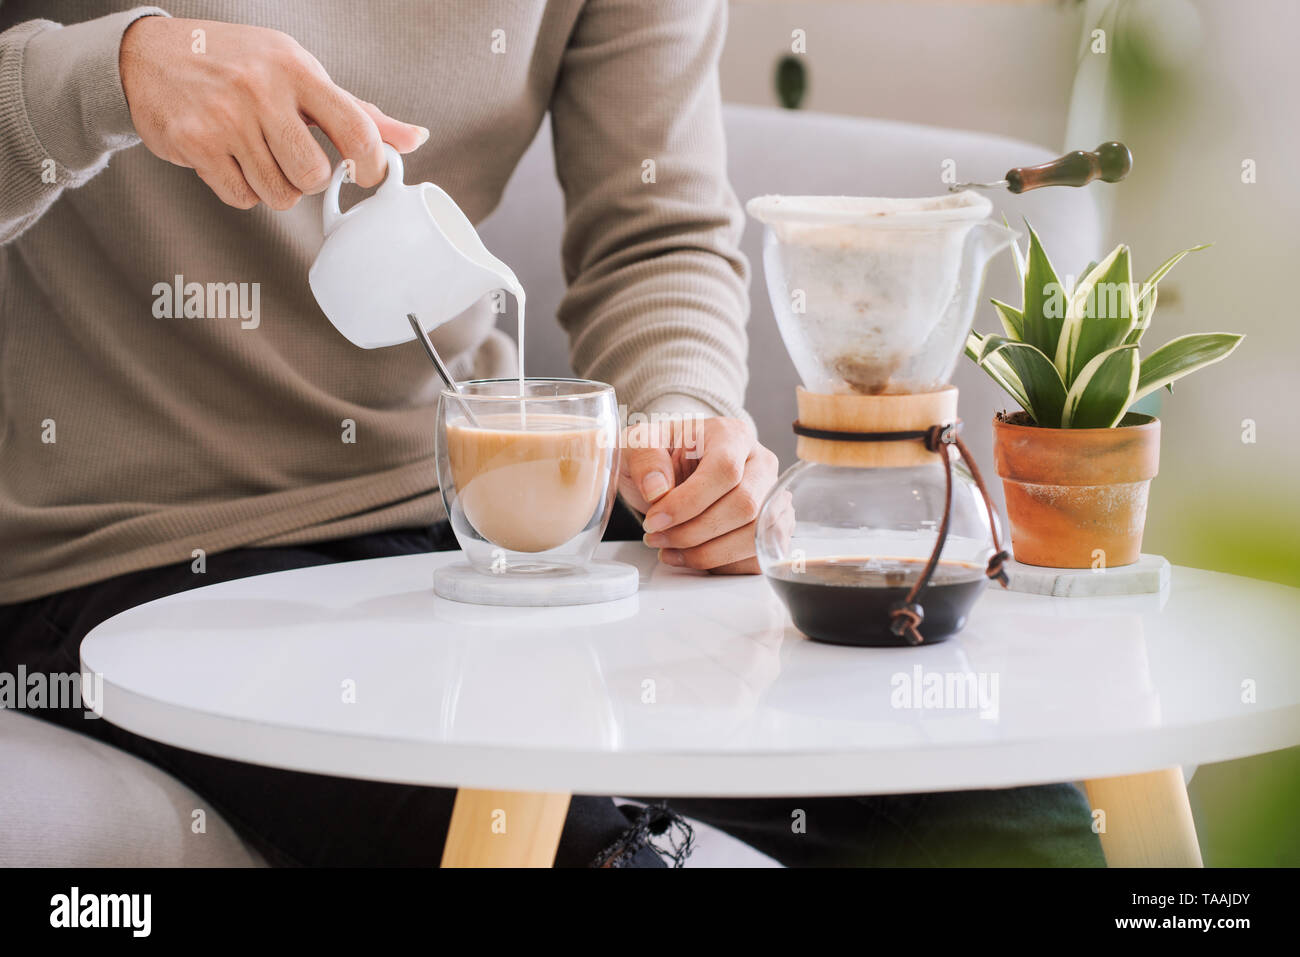 Coffee DRINK : man's hand pouring milk into a glass of espresso coffee in living room. Stock Photo